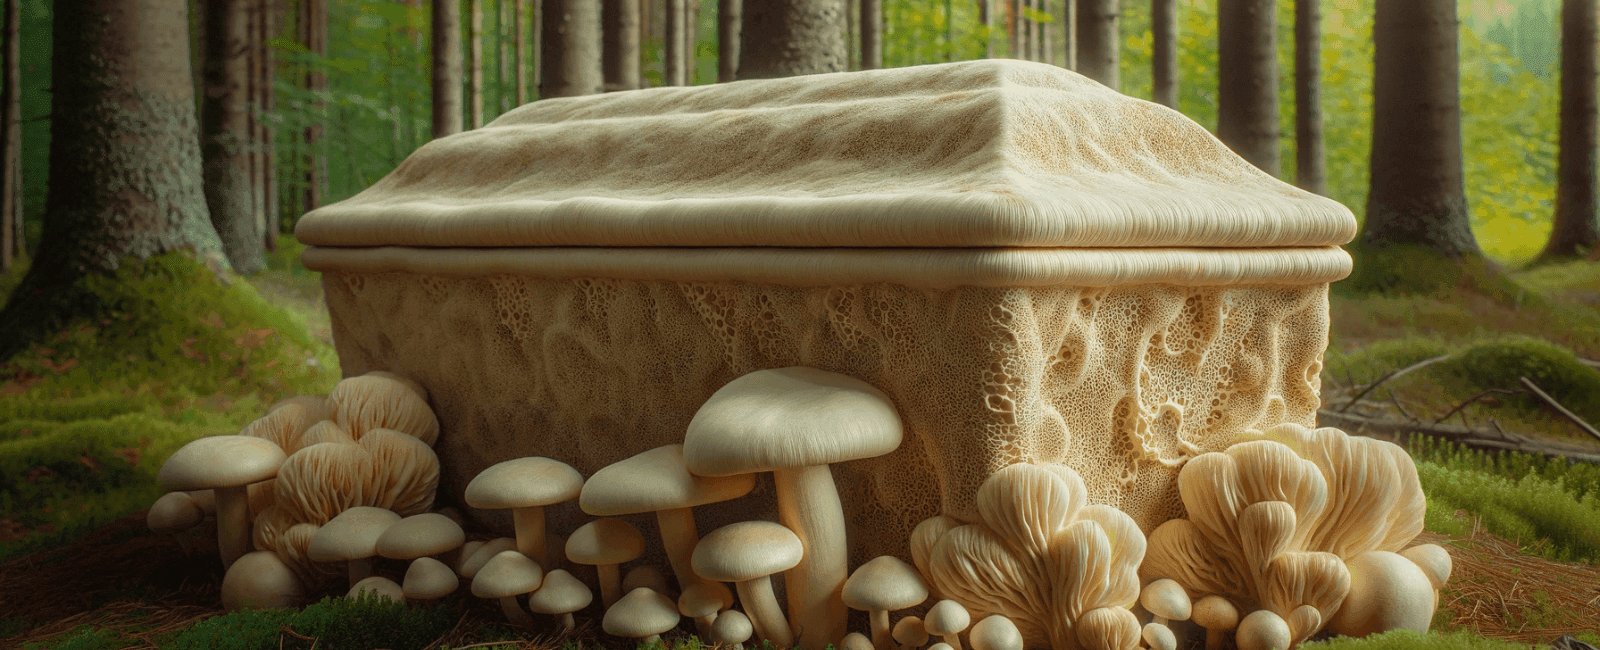 Coffins Made from Mushroom Mycelium May Be the Future of Green Burials